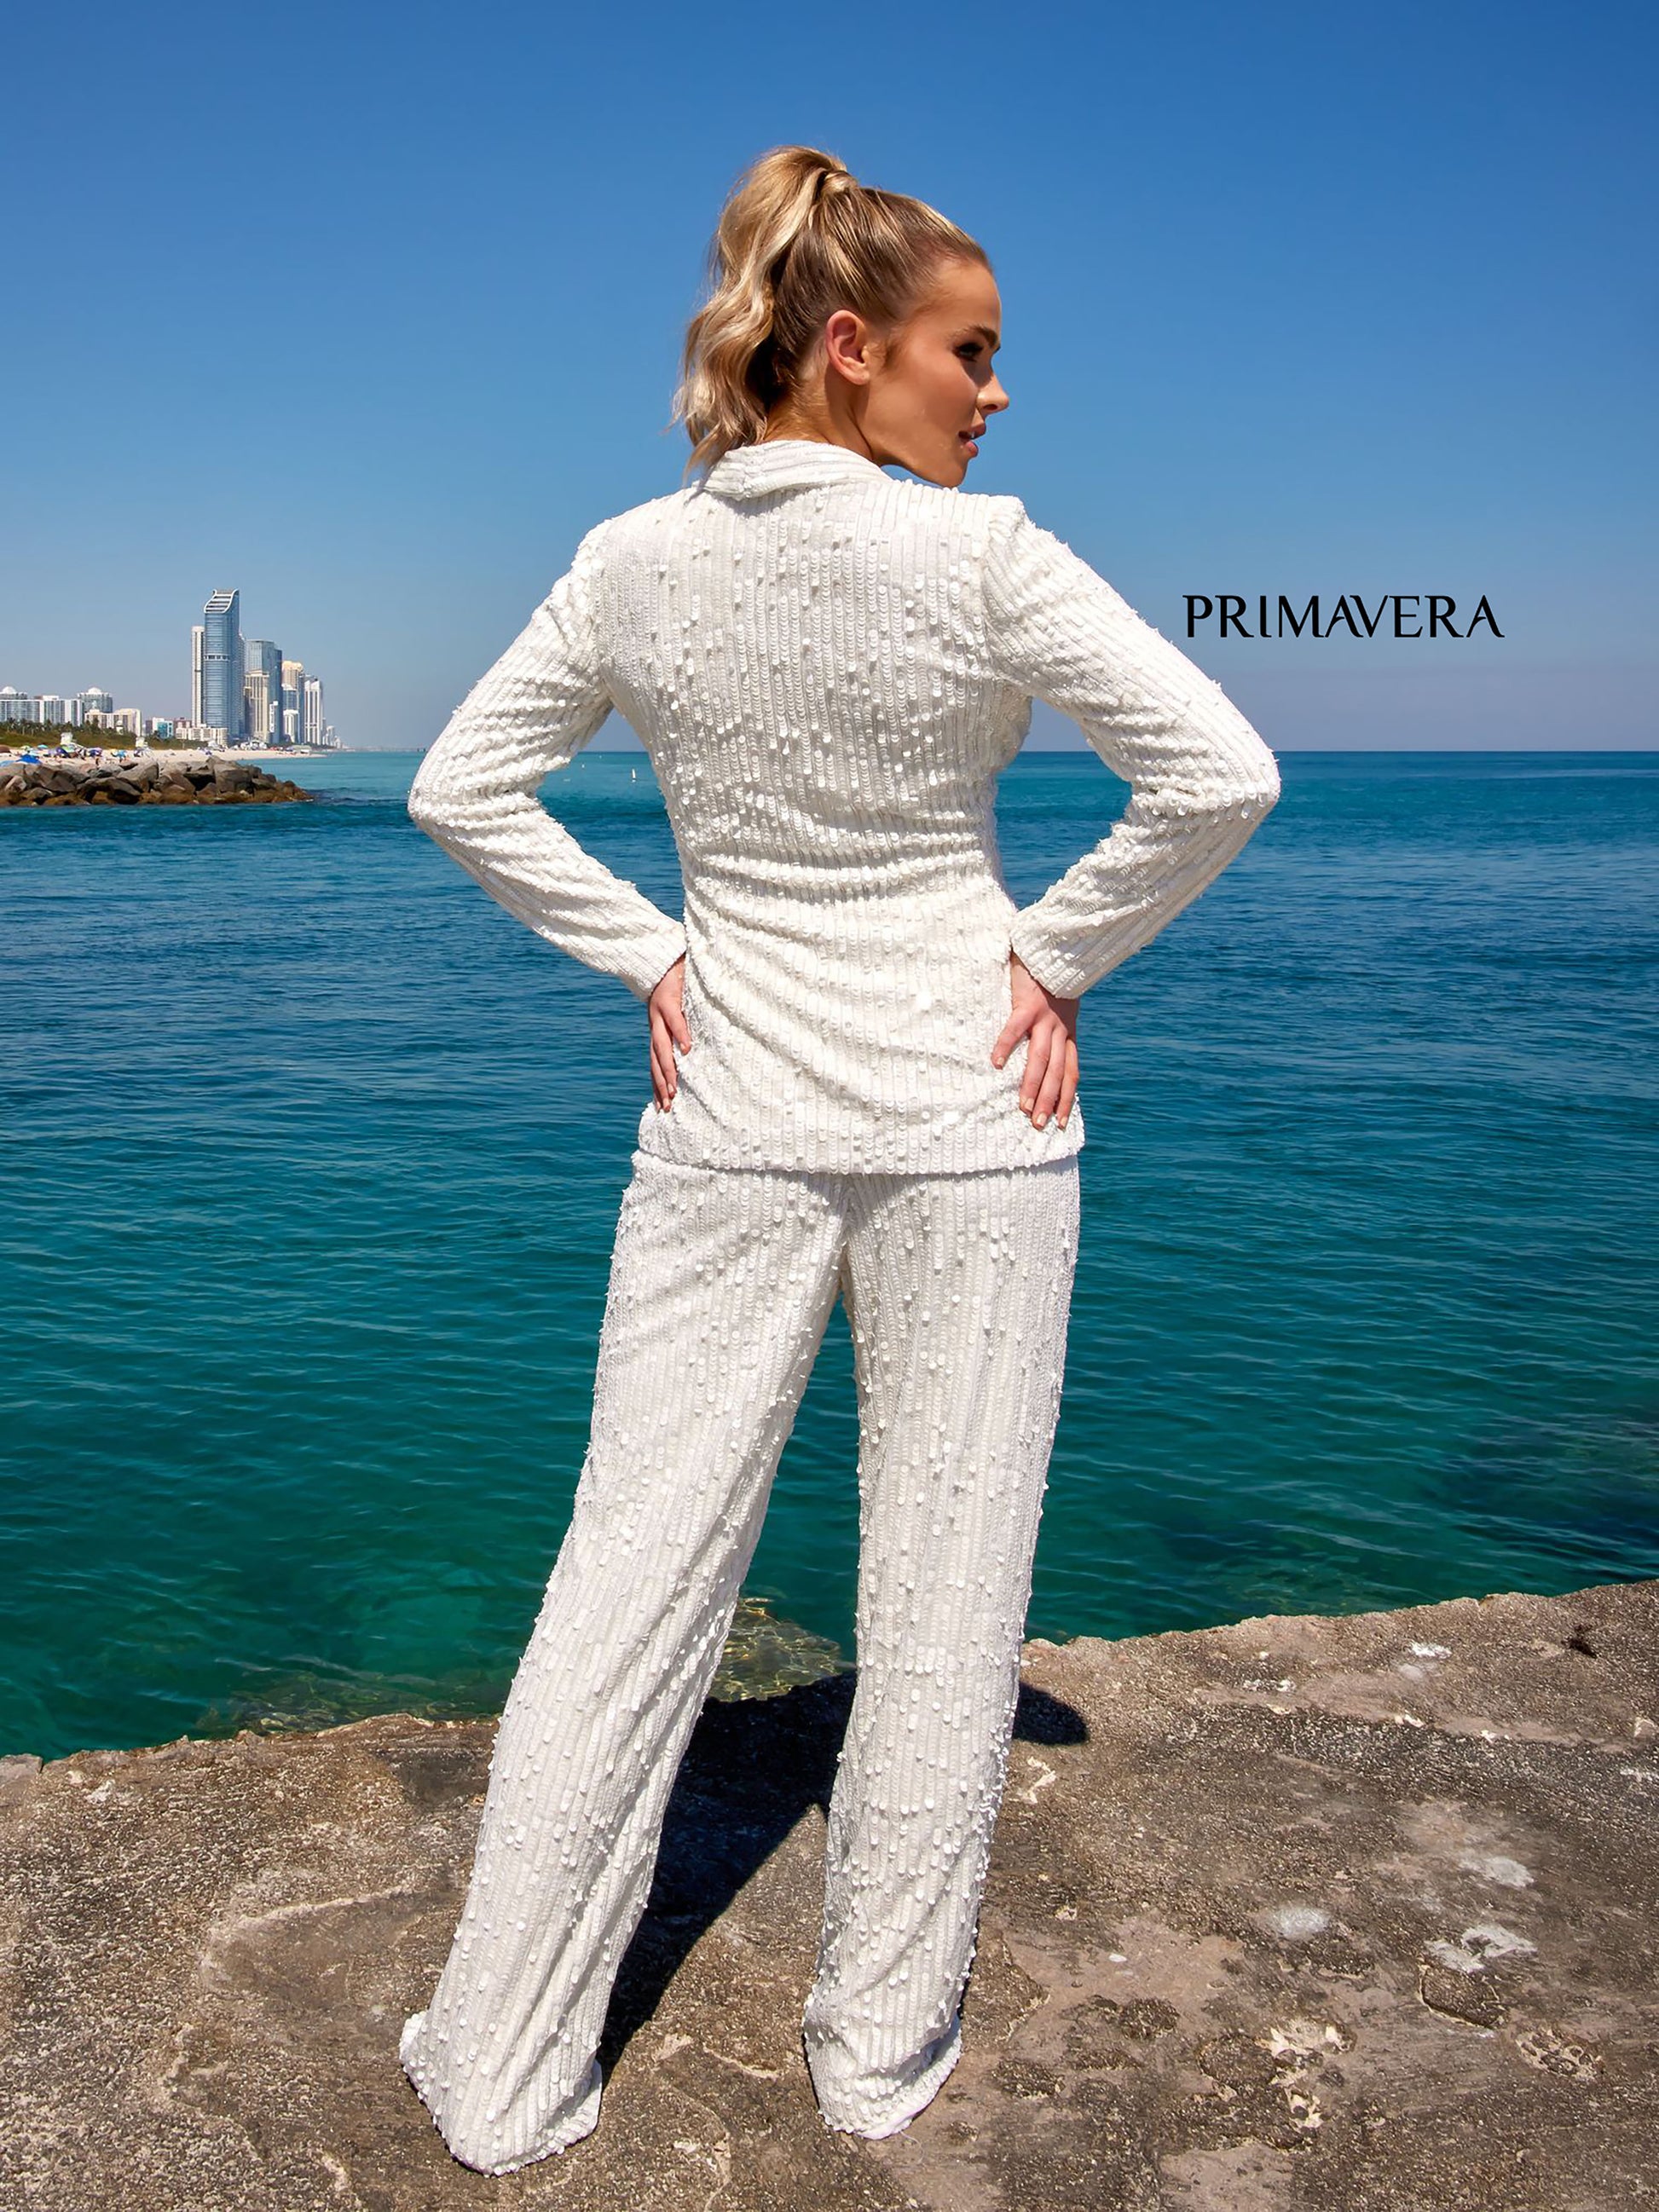 Primavera Couture 4063 Make a statement in the Primavera Couture 4063 Suit. Crafted from 100% sequins, its one-button styling and long pants create a classic look perfect for any occasion. The sequins provide a glossy, eye-catching finish, ensuring you look and feel your best.